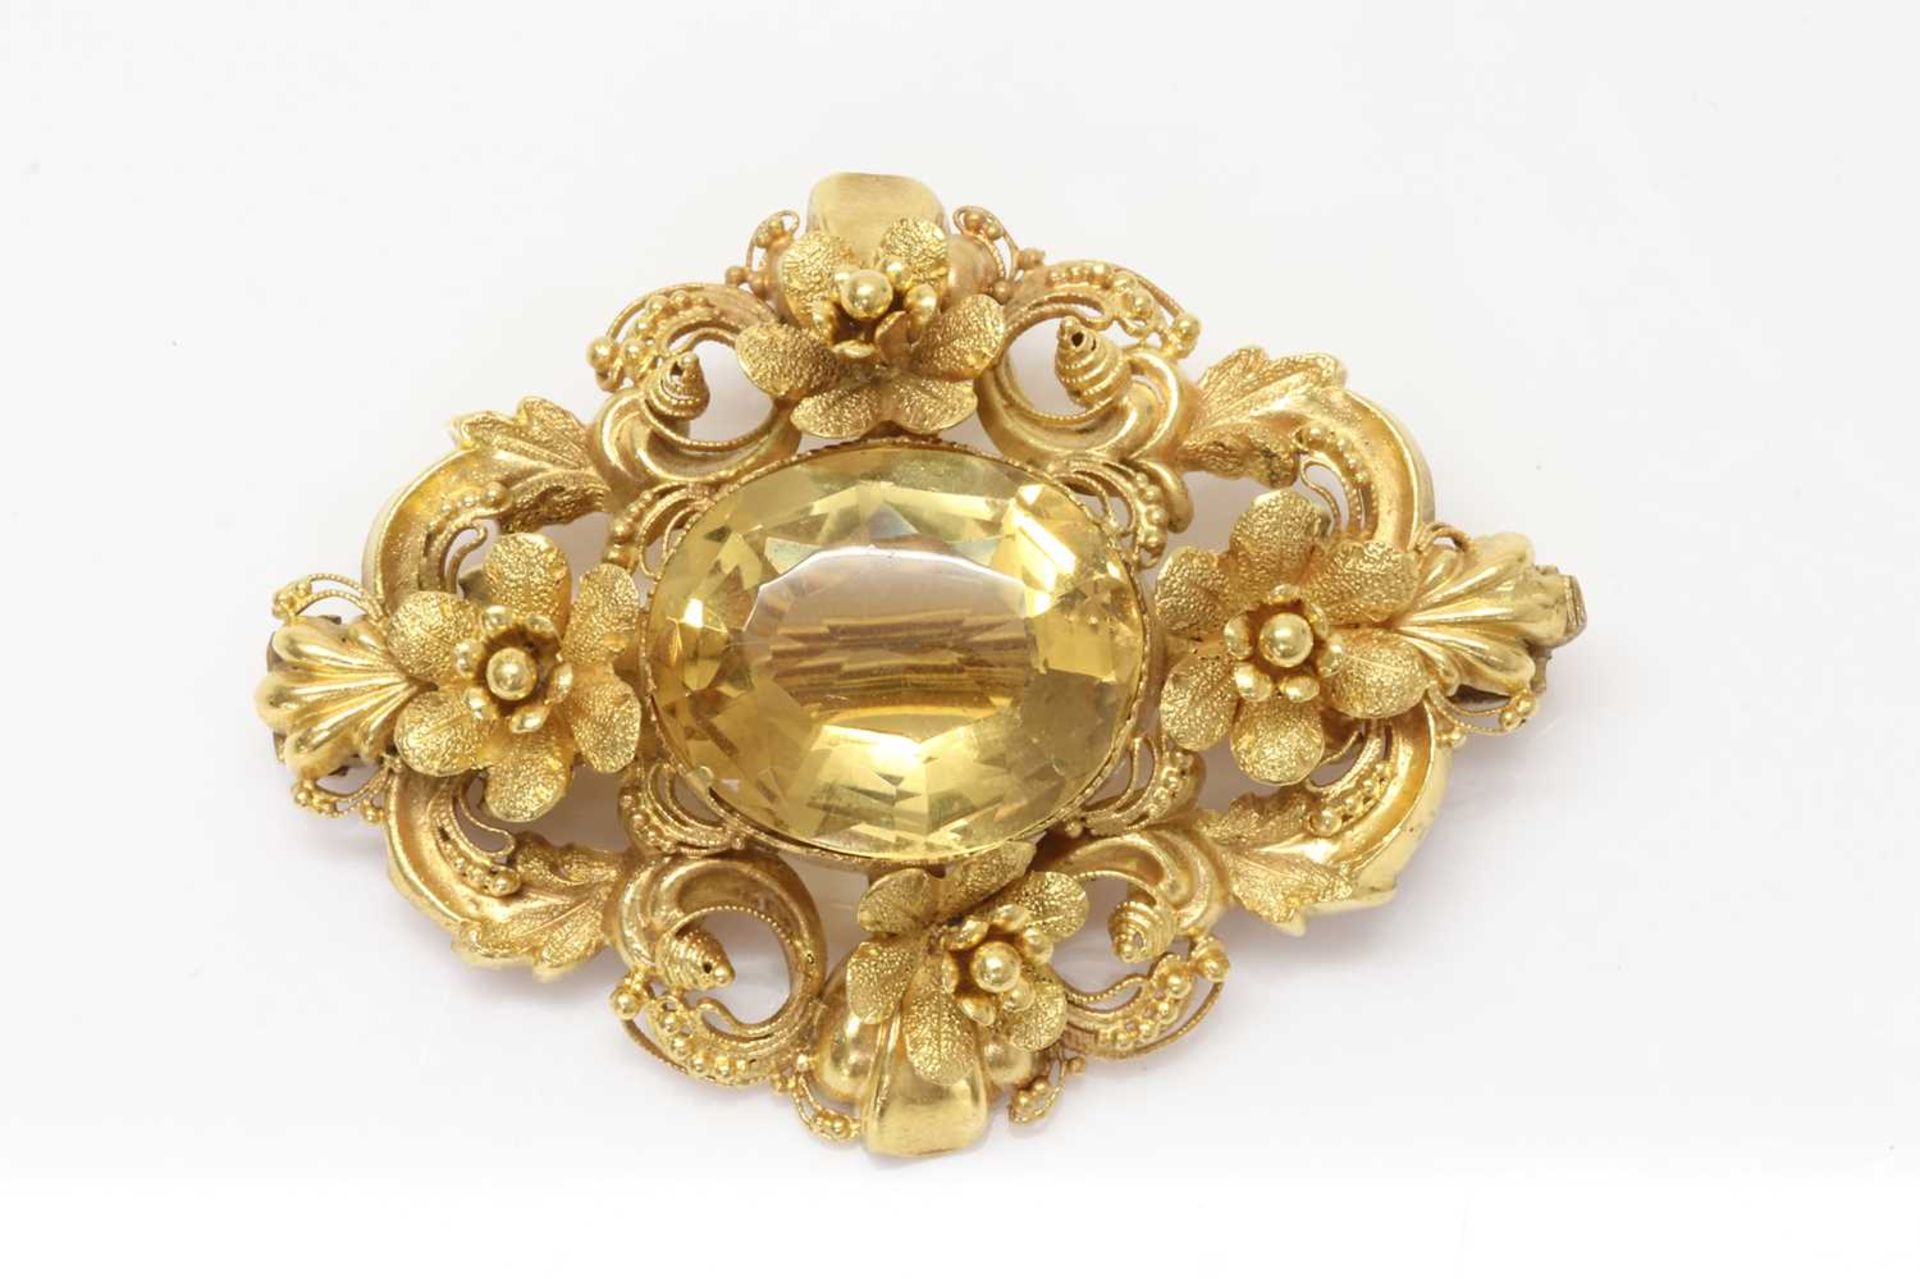 A Victorian gold citrine brooch, c.1840, - Image 2 of 2